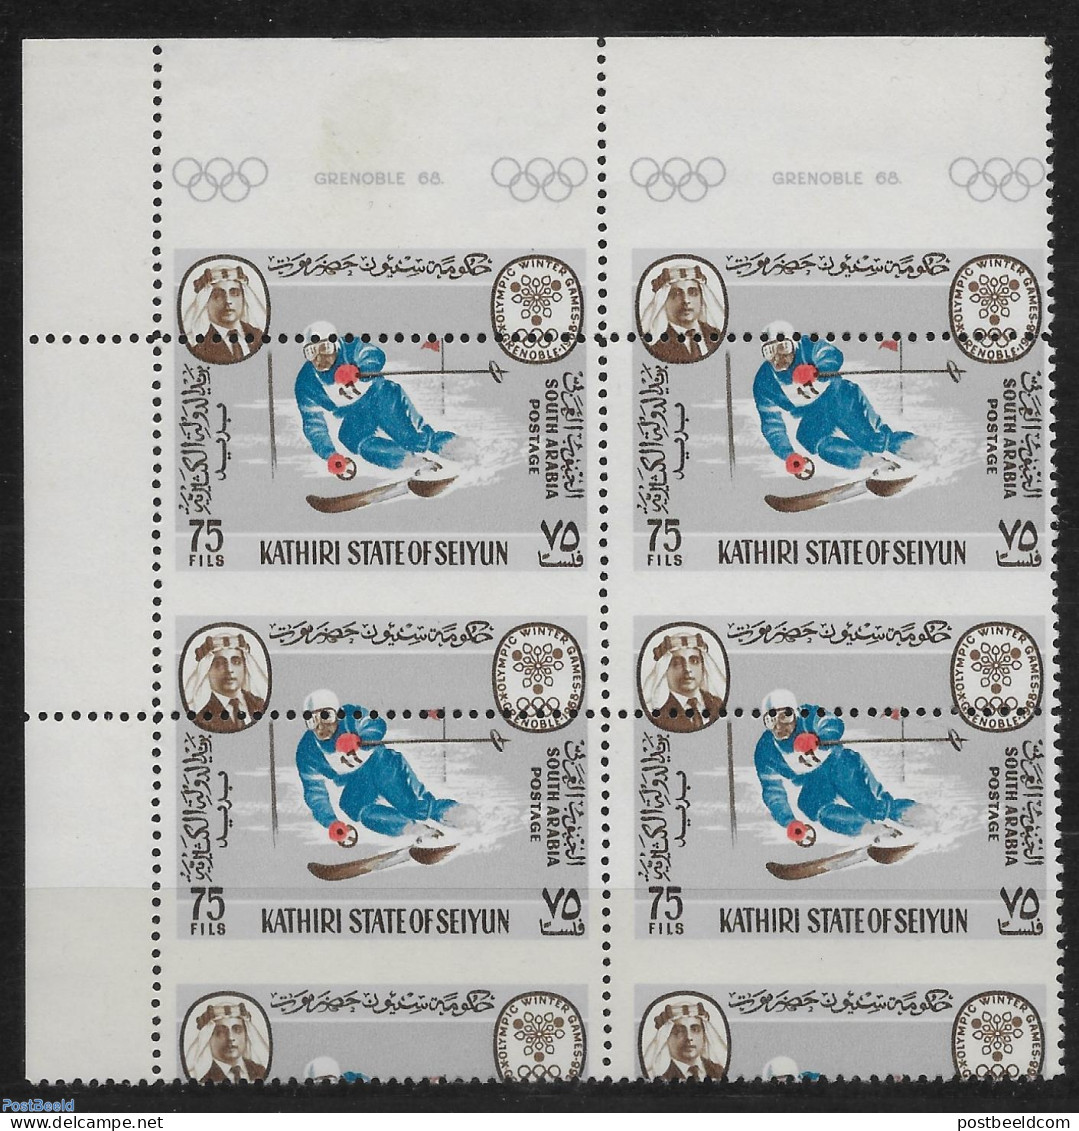 Aden 1968 Error 4v., Mint NH, Sport - Various - Olympic Winter Games - Errors, Misprints, Plate Flaws - Oddities On Stamps